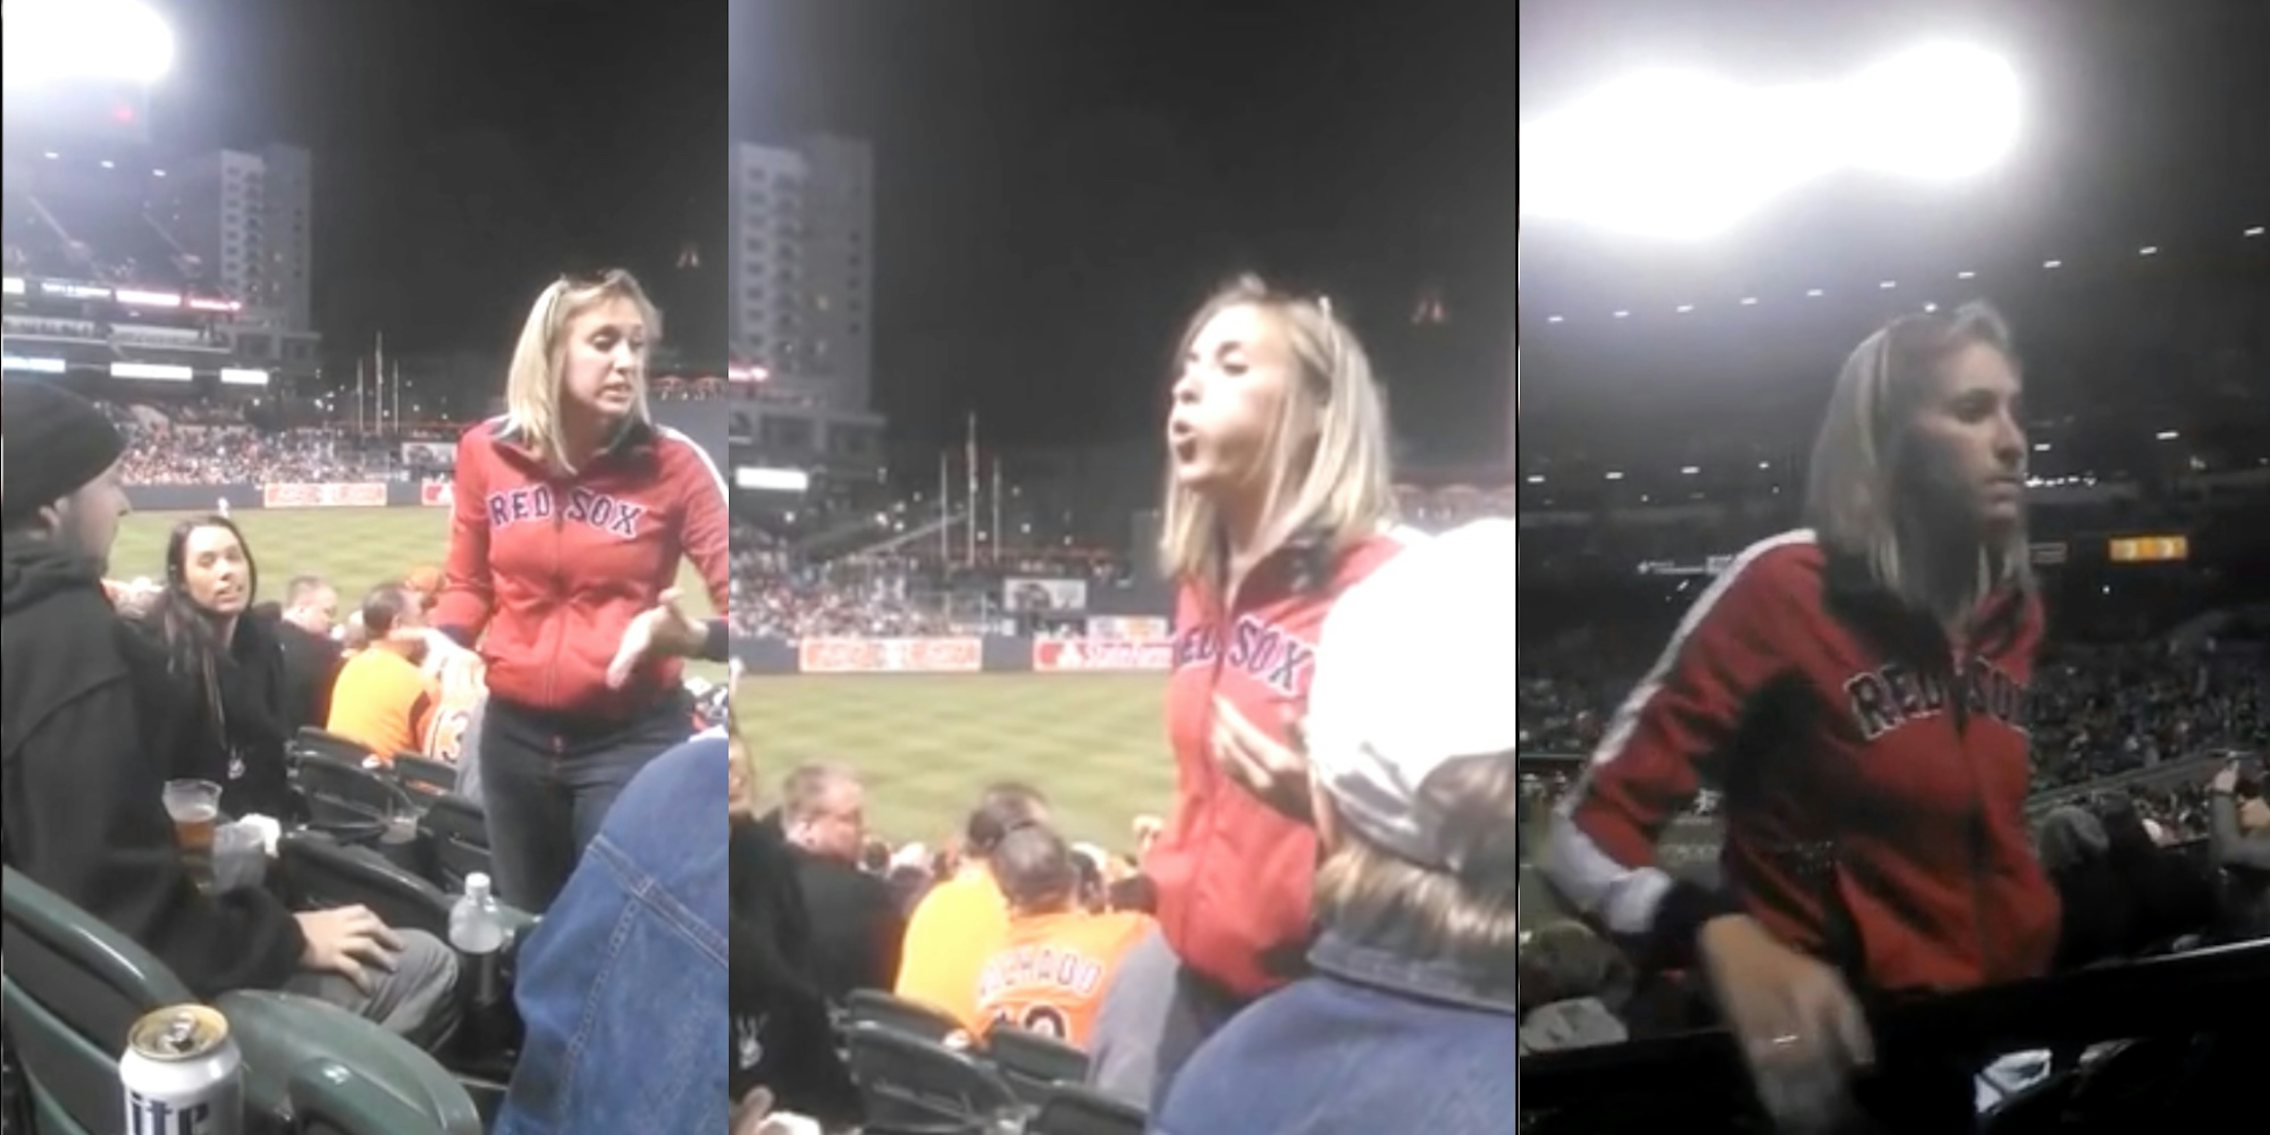 Red Sox fan spits on man over seat dispute